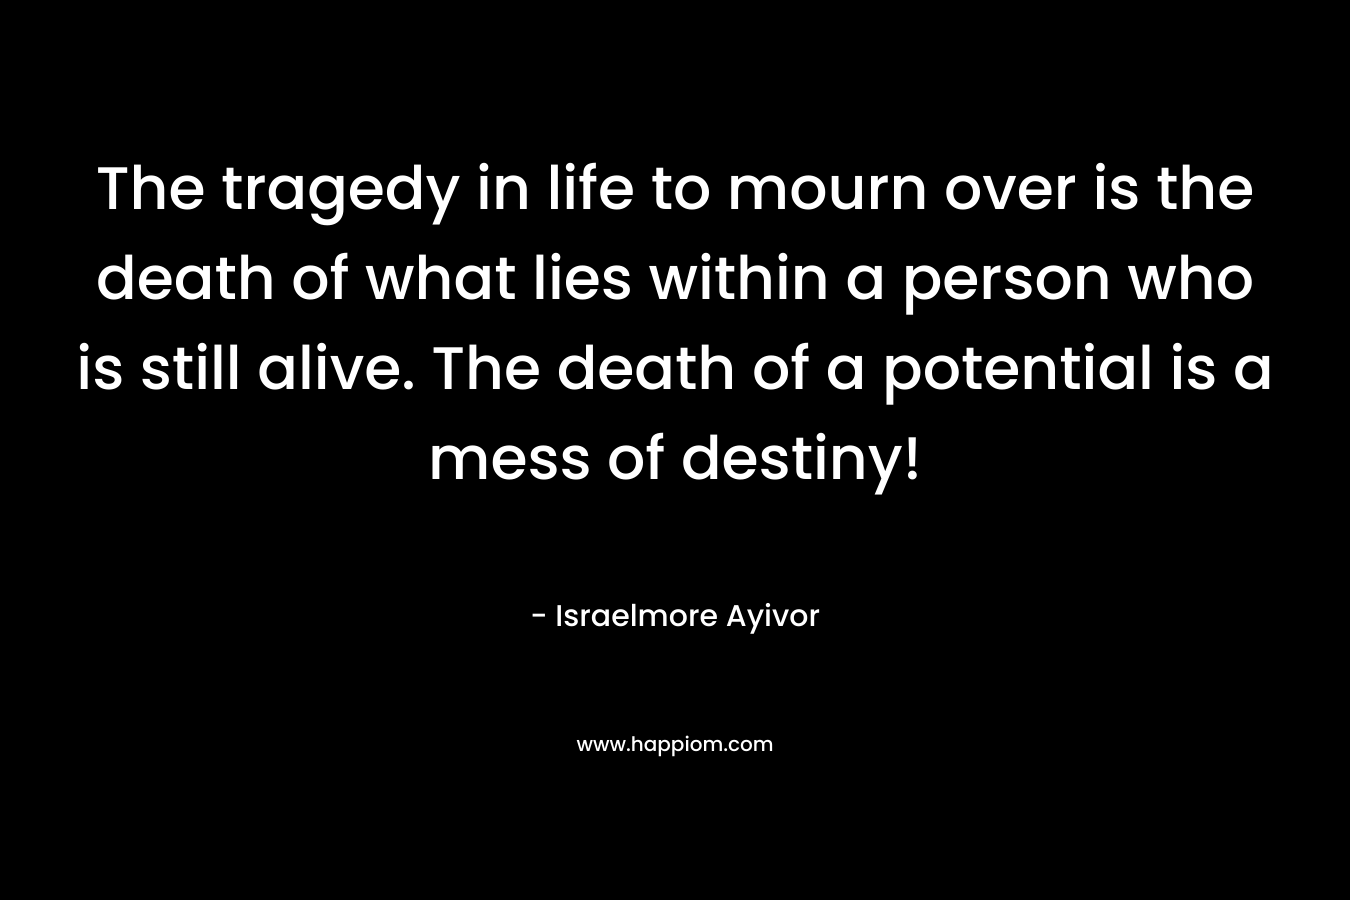 The tragedy in life to mourn over is the death of what lies within a person who is still alive. The death of a potential is a mess of destiny!